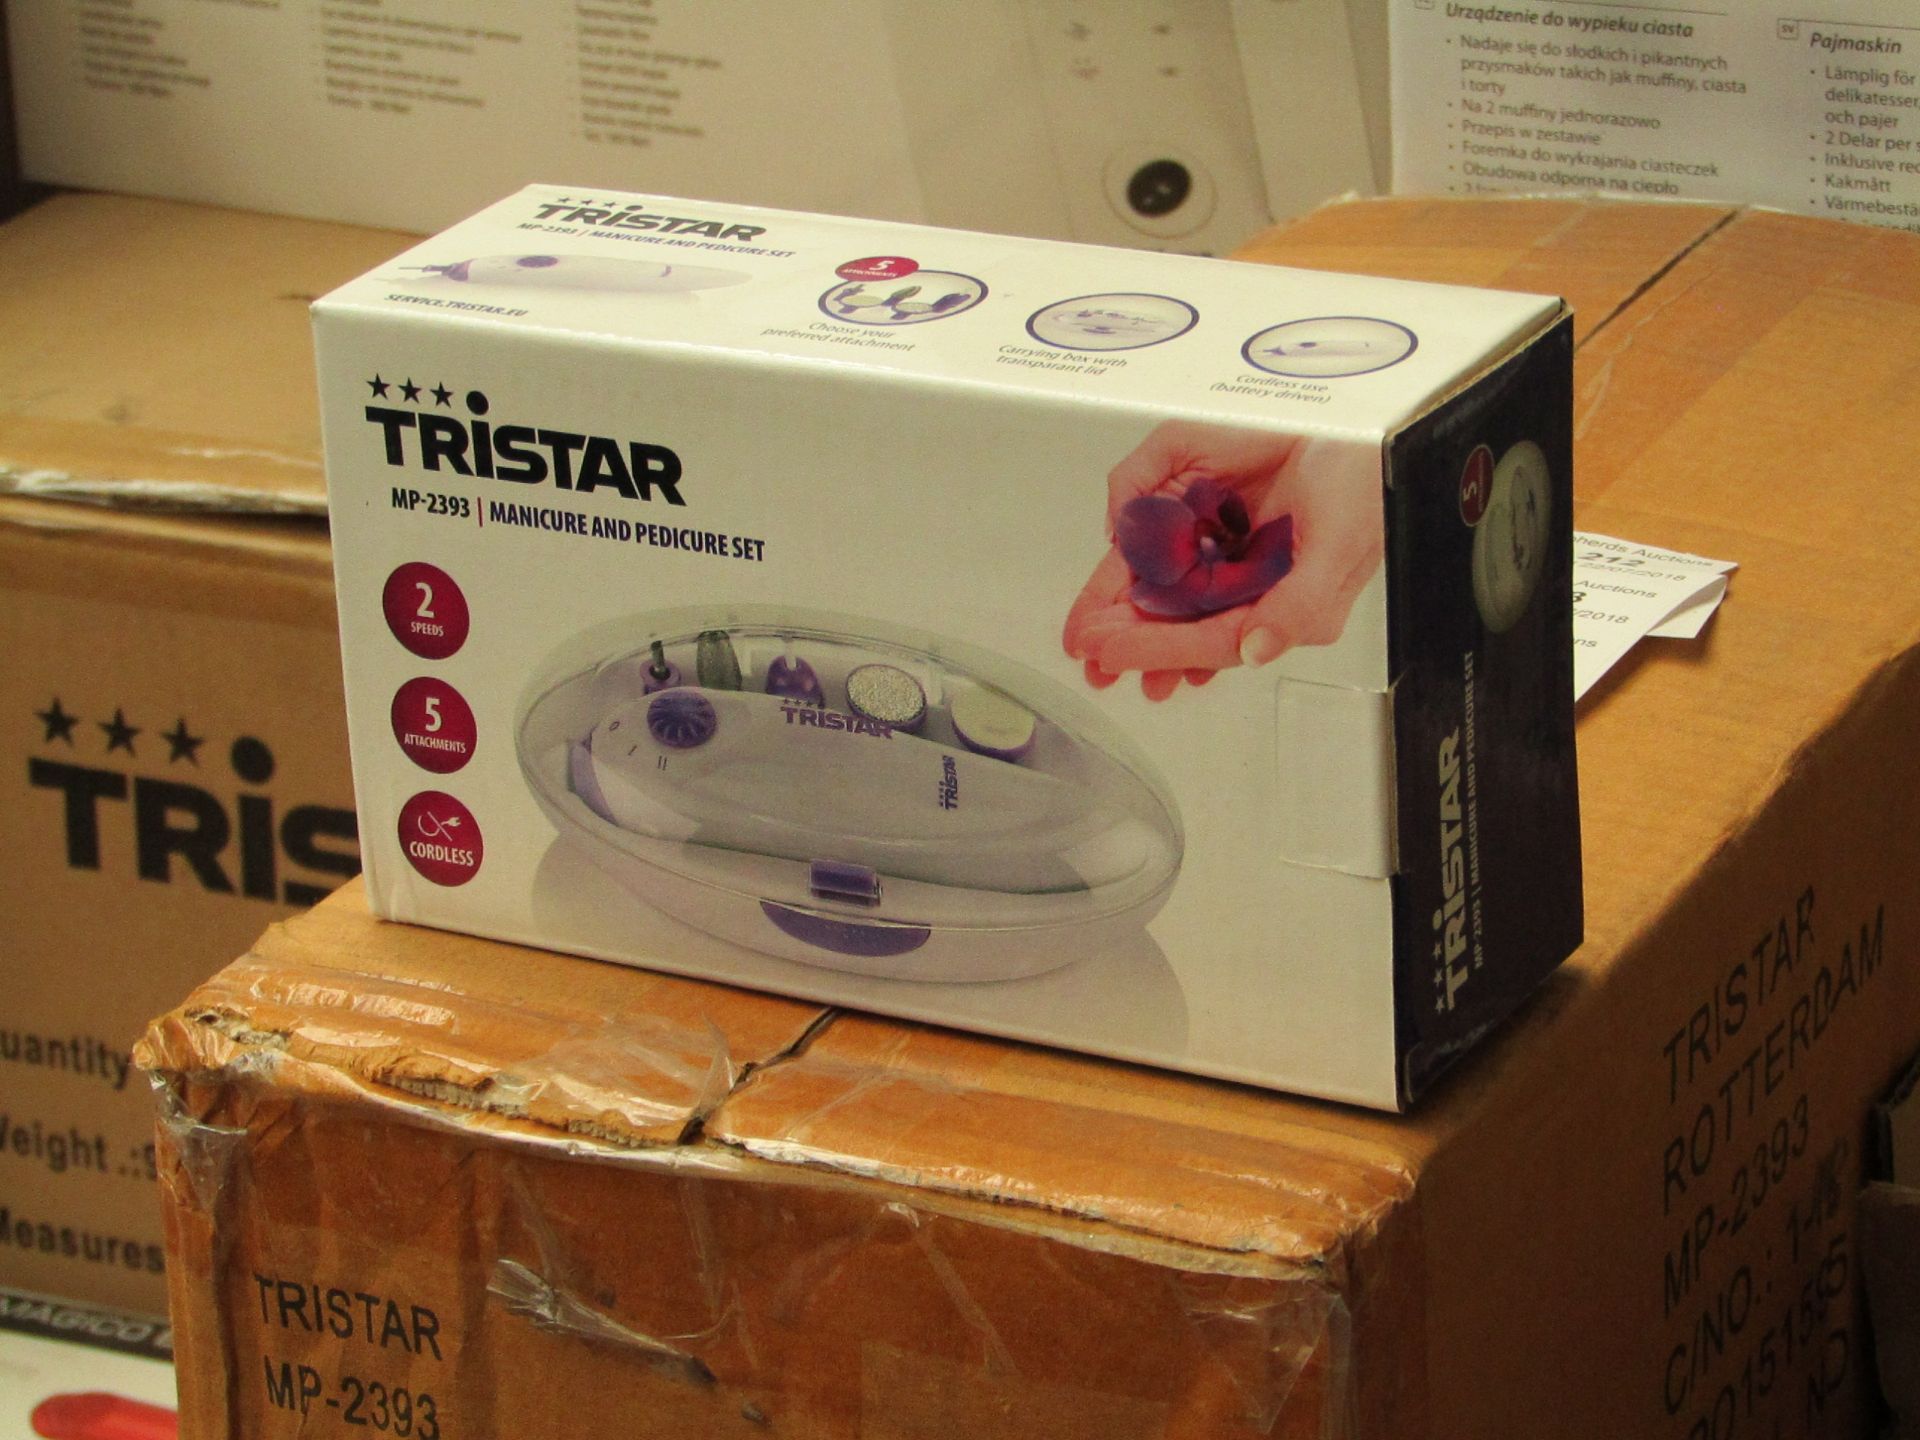 Tri Star manicure and pedicure set, new and boxed.